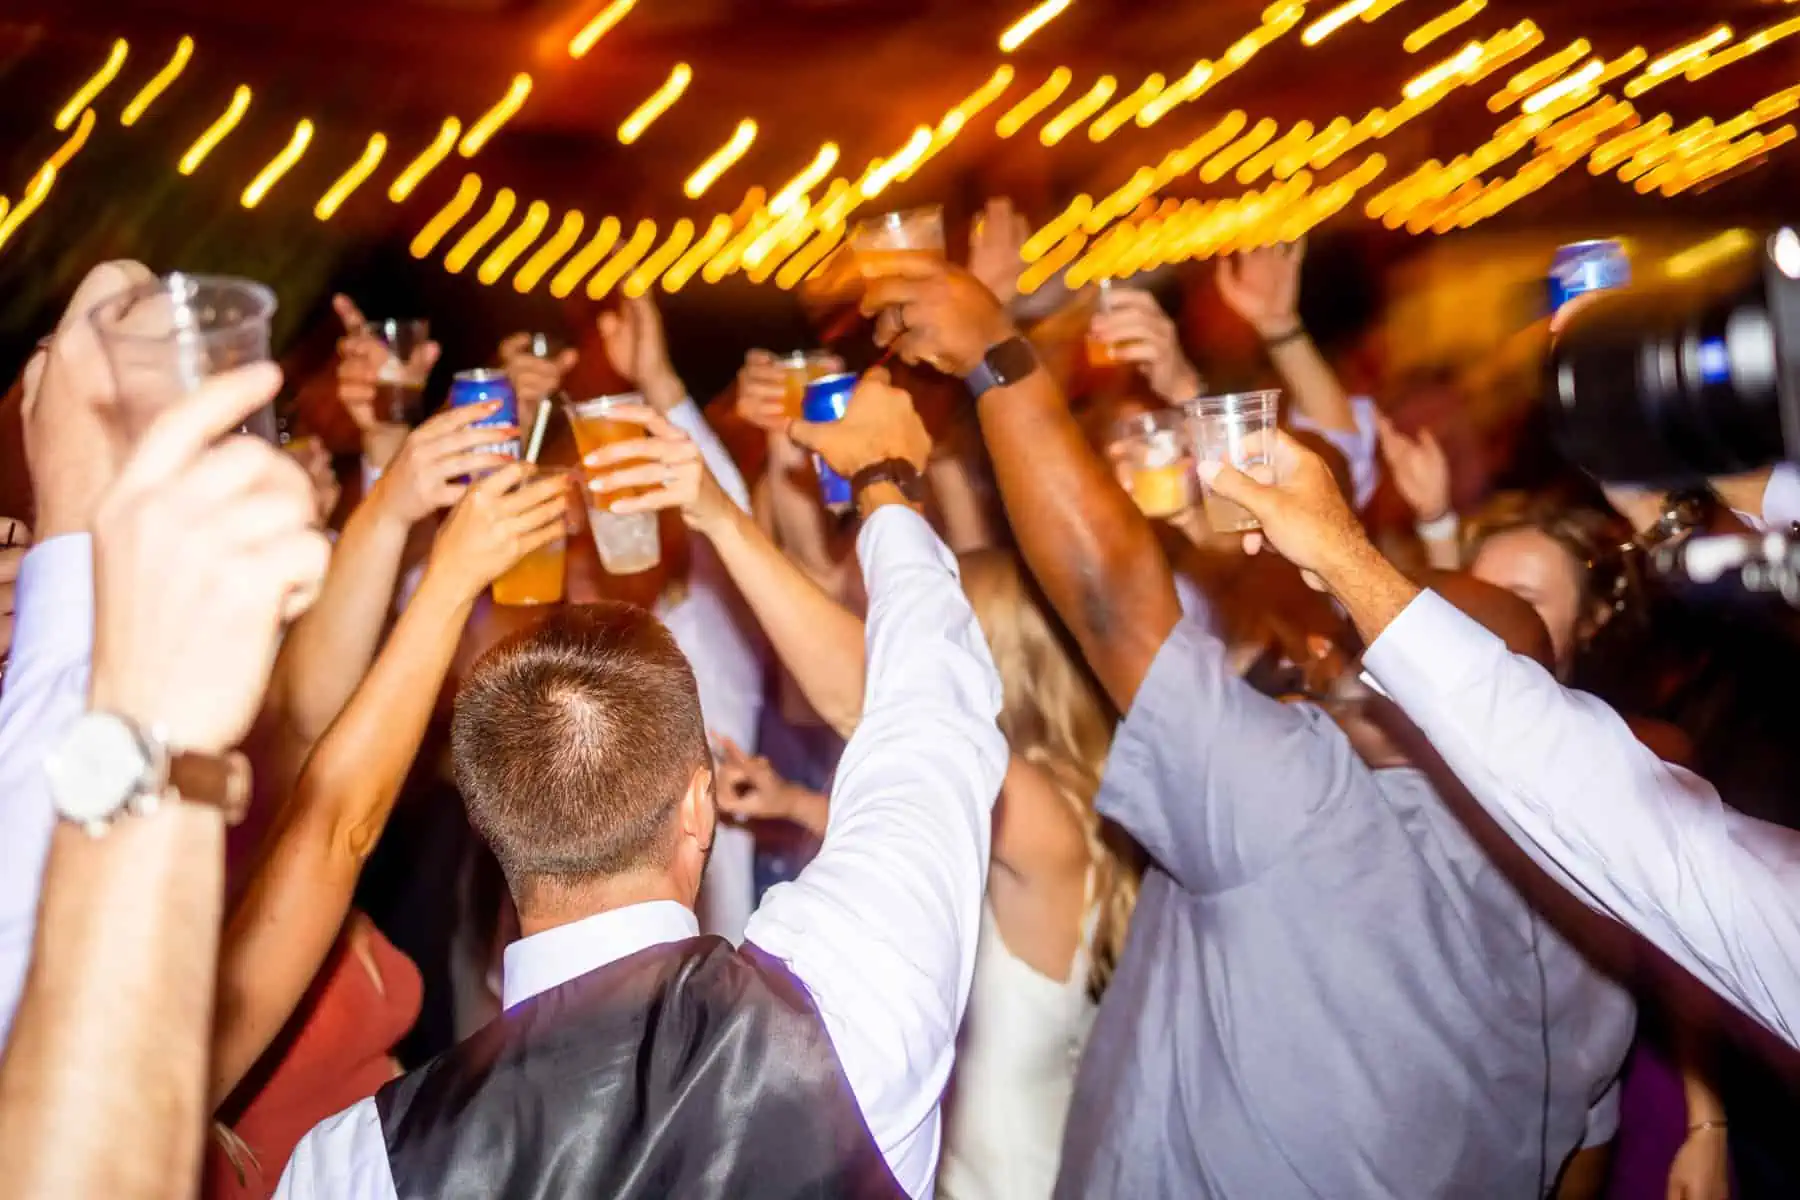 A group of people raising their glasses at a party.